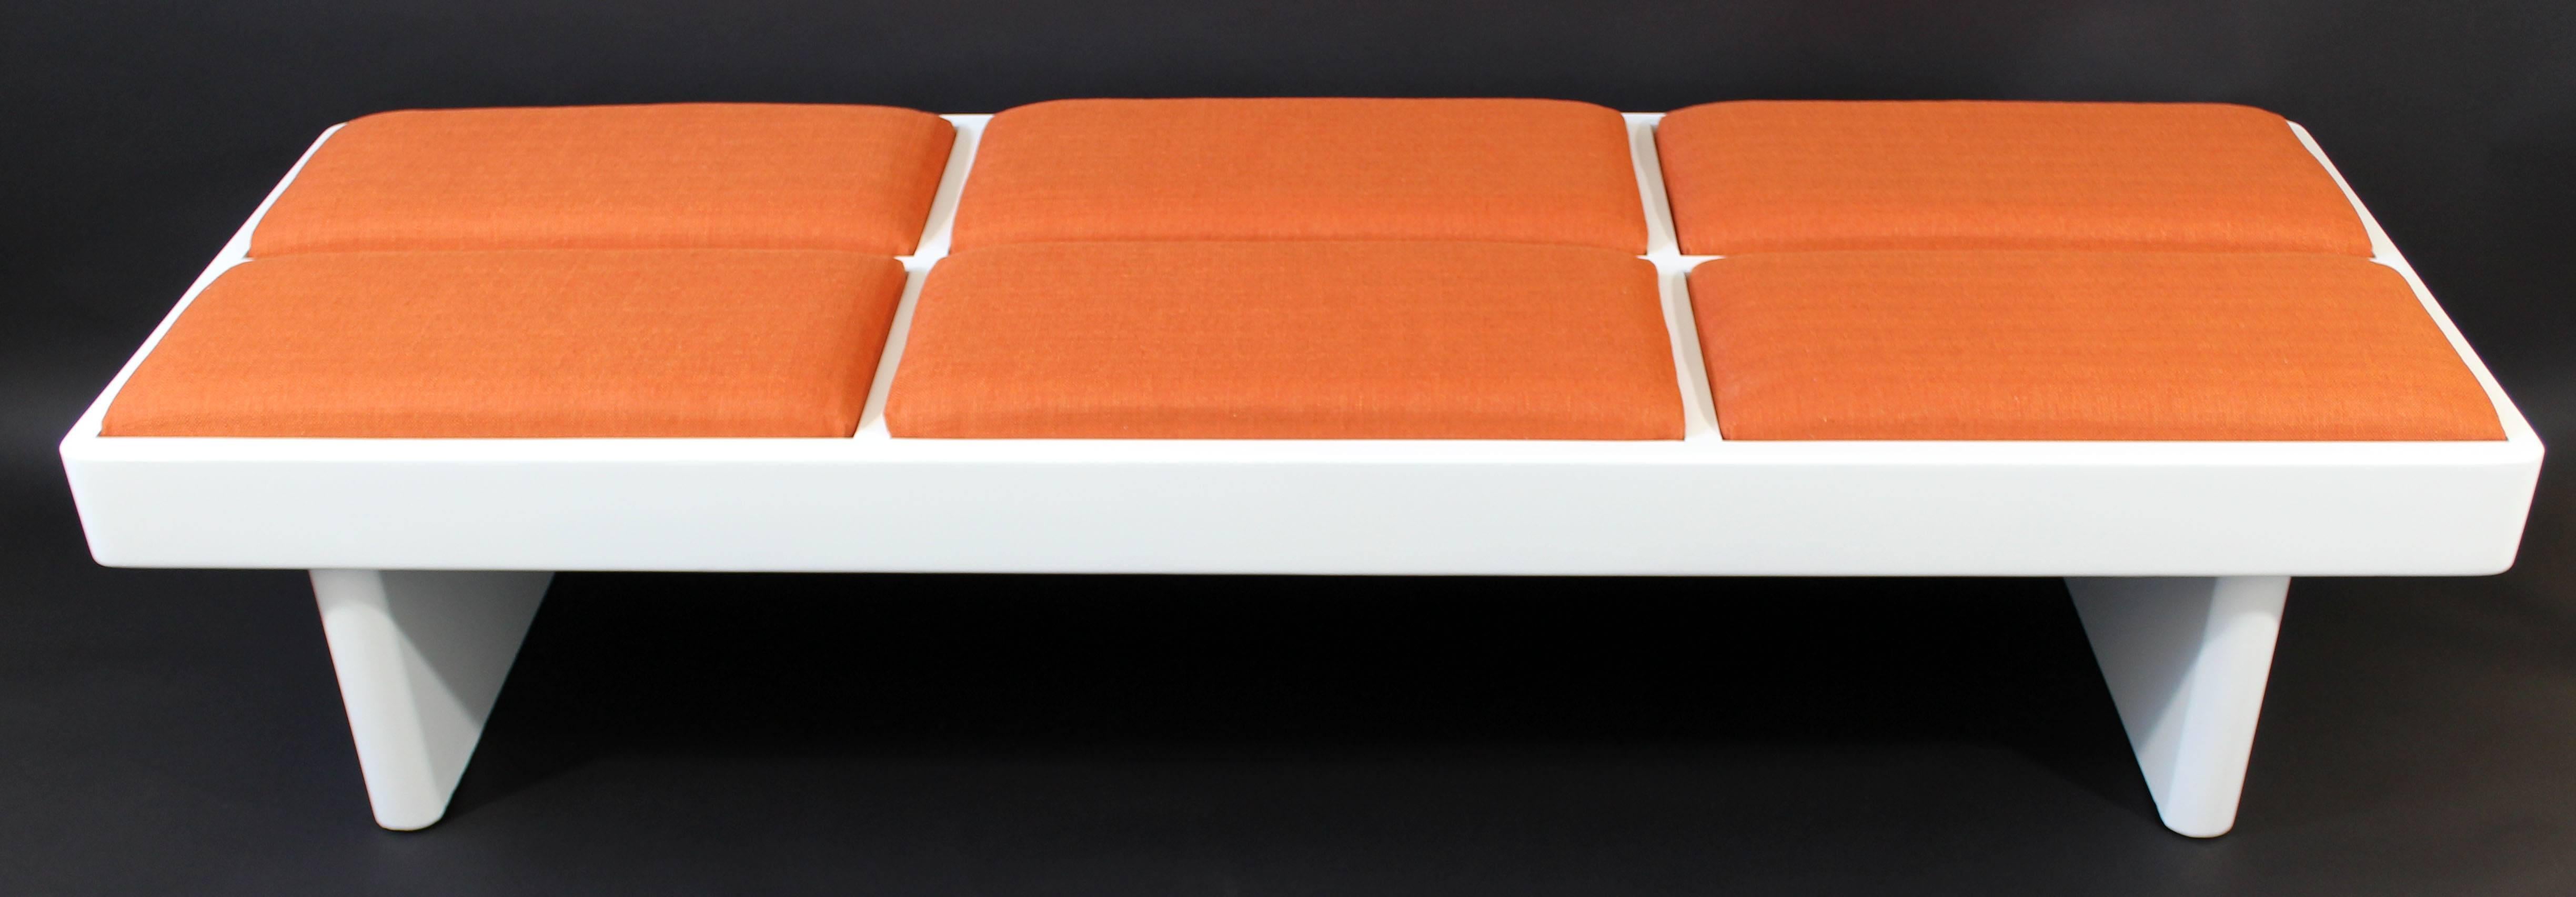 Late 20th Century Mid-Century Modern Modernist White Lacquer Wood Long Orange Padded Bench, 1970s